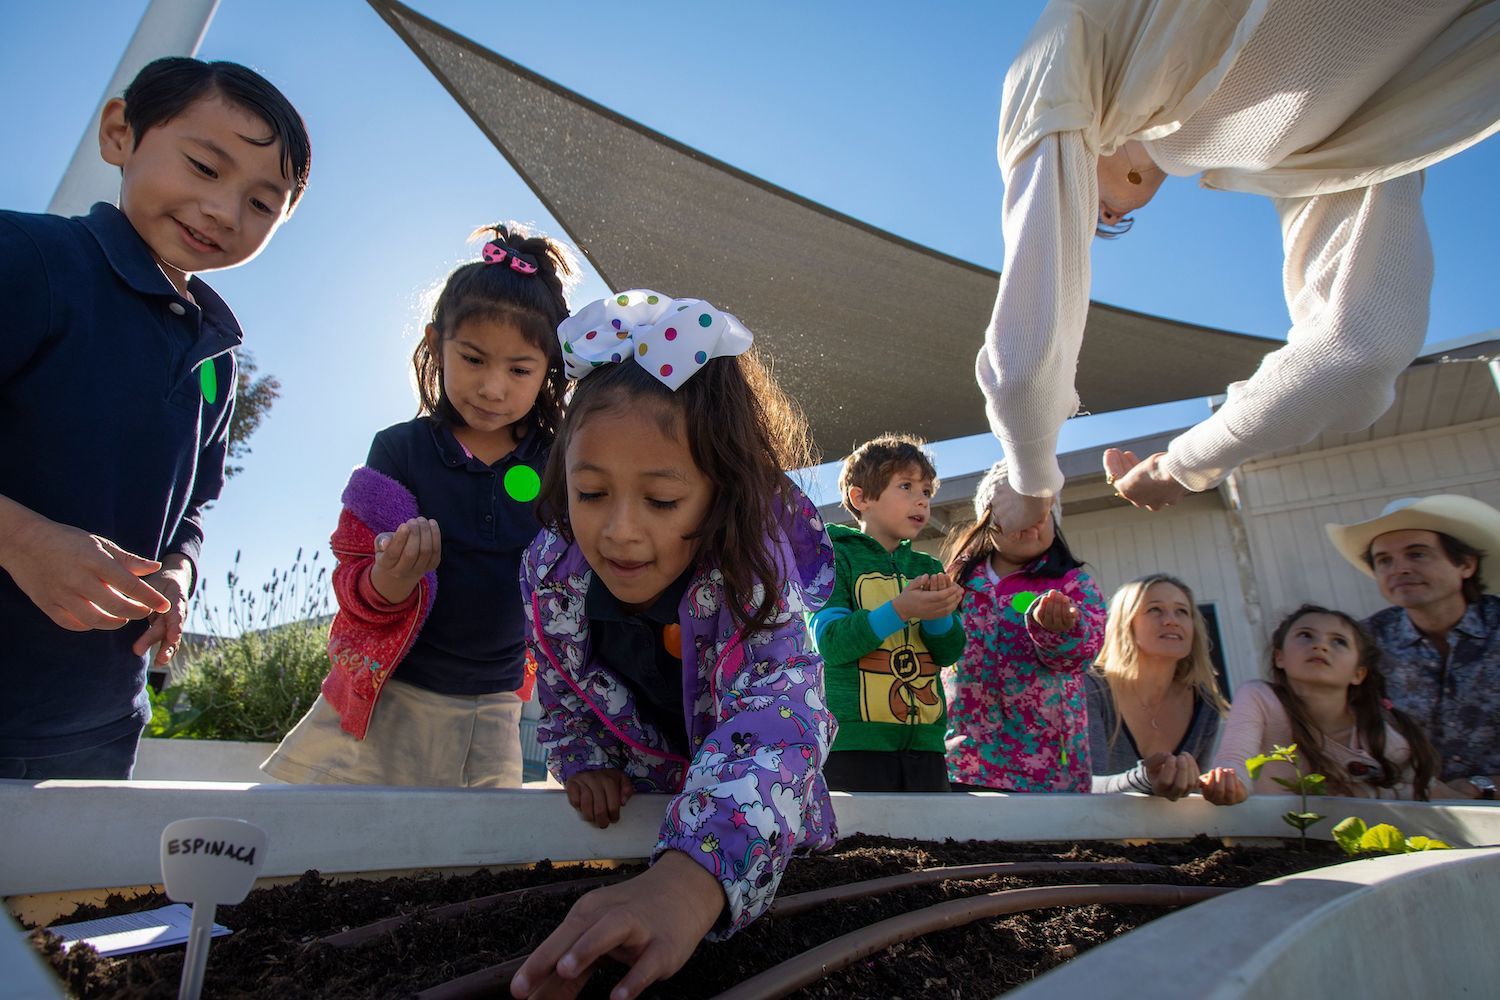 Kimbal Musk (R), wife Christiana and daughter Stella, 6, look on as students at Eucalyptus Elementary School learn to plant a vegetable garden in preparation for Plant a Seed Day in Hawthorne, California on March 13, 2019.